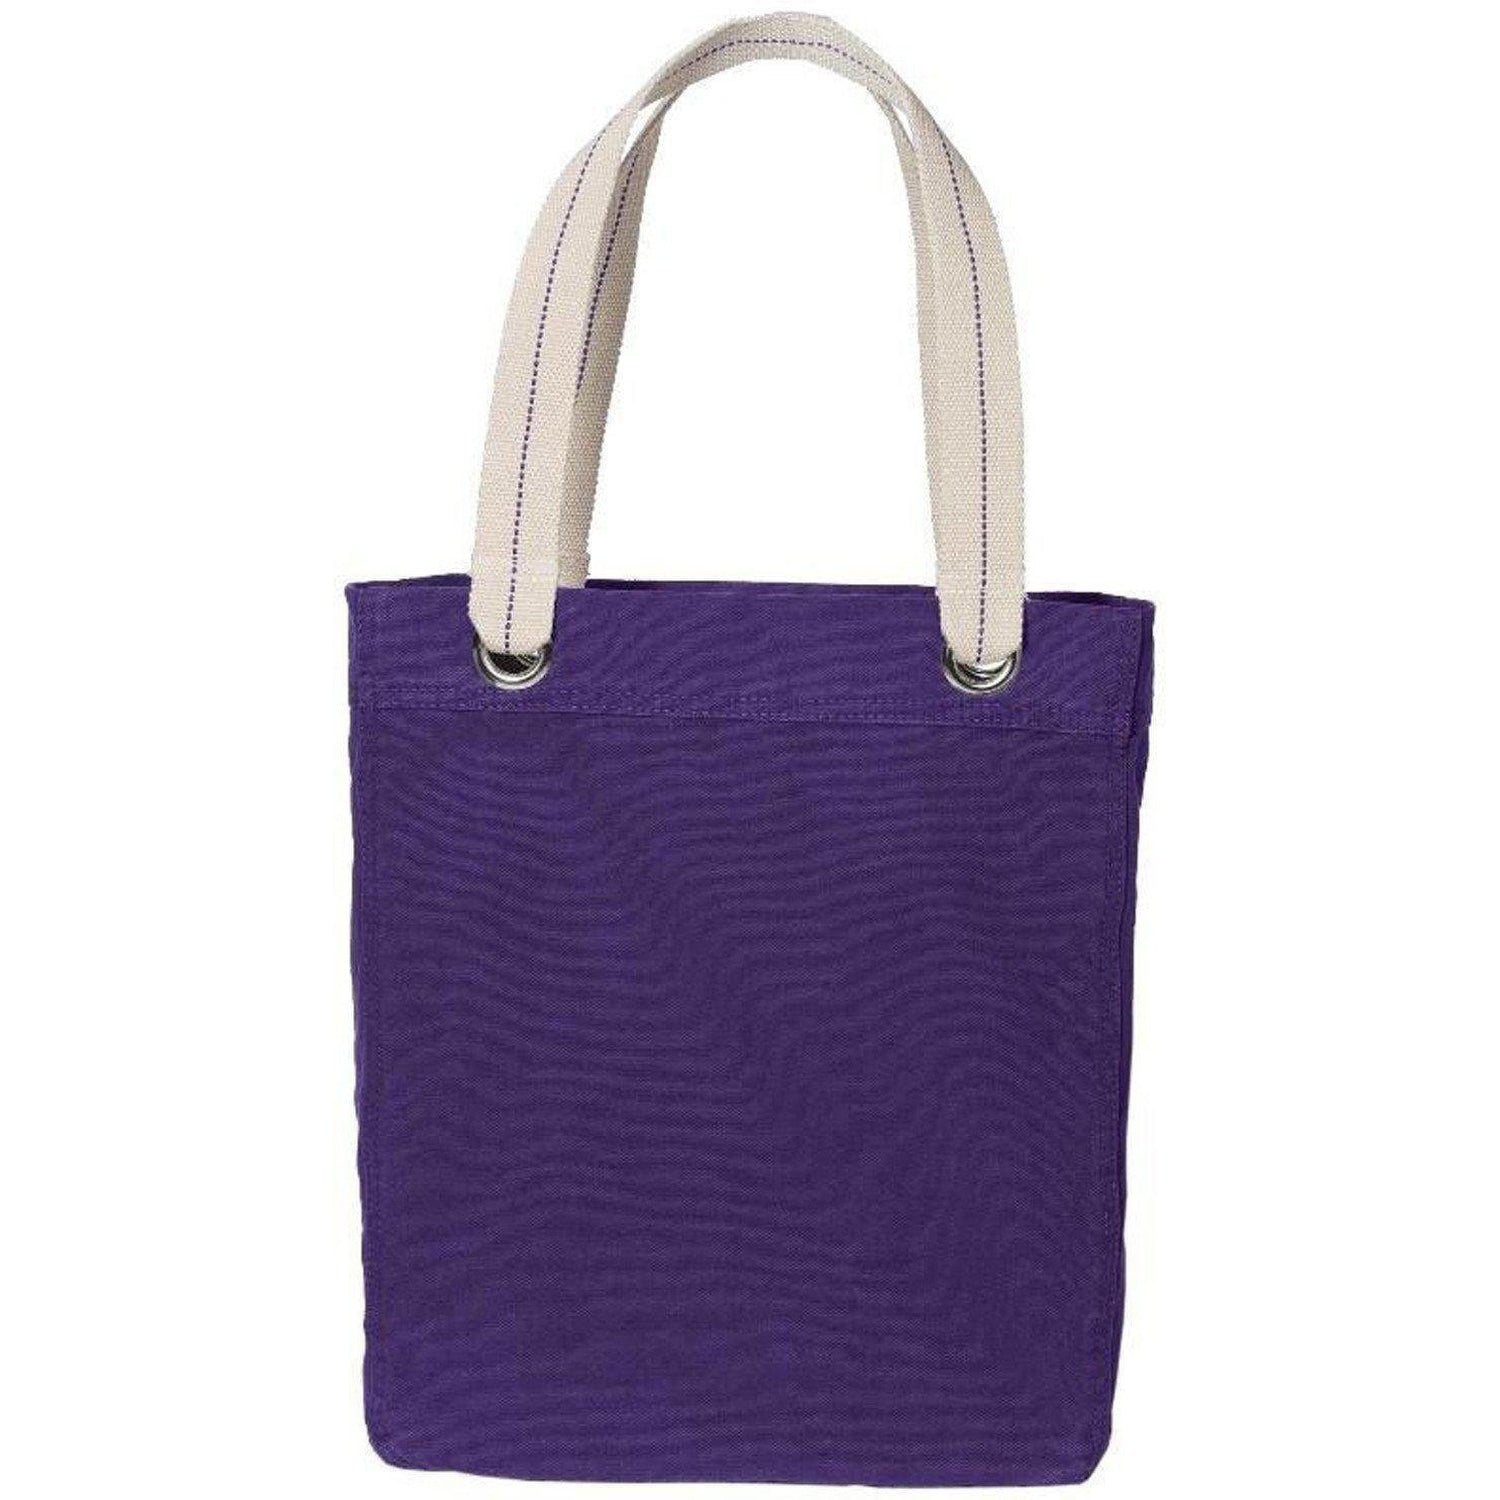 Sturdy and Cute Canvas Tote Bags Wholesale – BagzDepot™